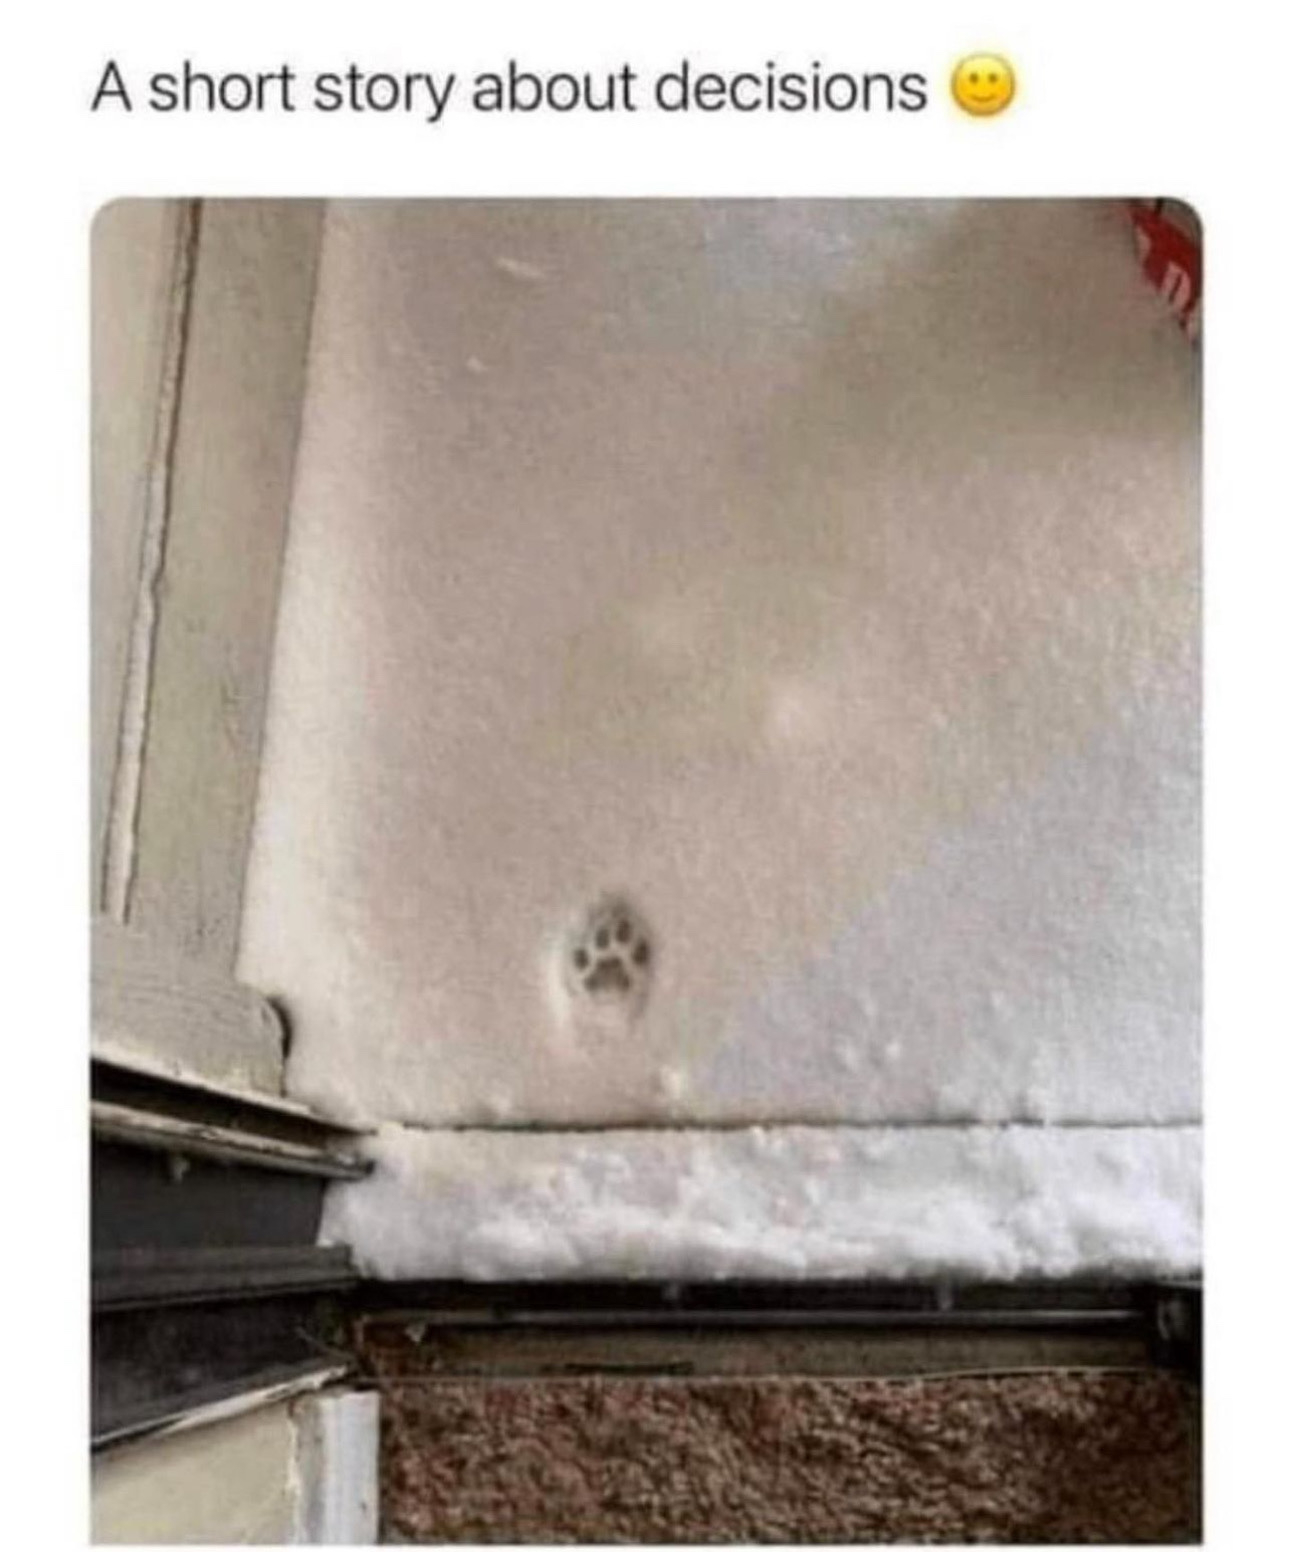 Text reads: "A short story about decisions 🙂"&10;There is a picture of an open doorway with snow outside and a single pawprint in the snow.